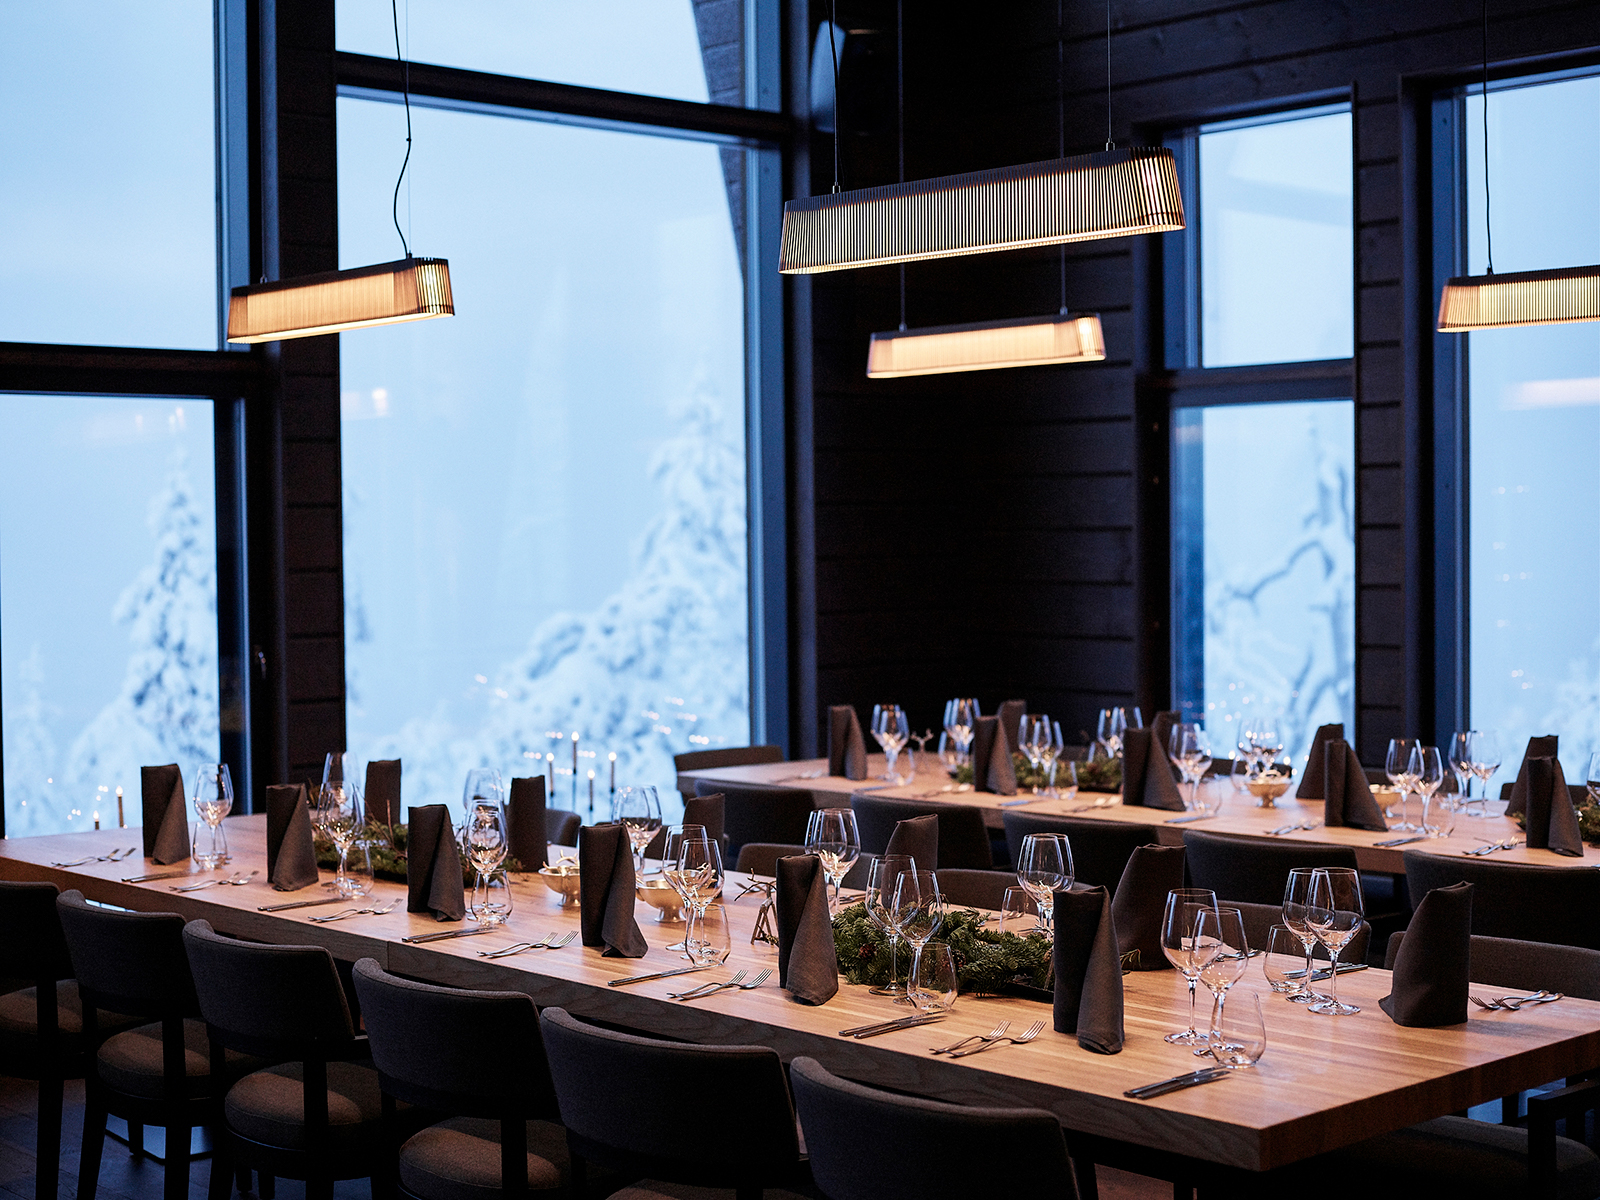 A dining hall with four Owalo pendant lamps and a winter landscape behind the window. The tables are laid.